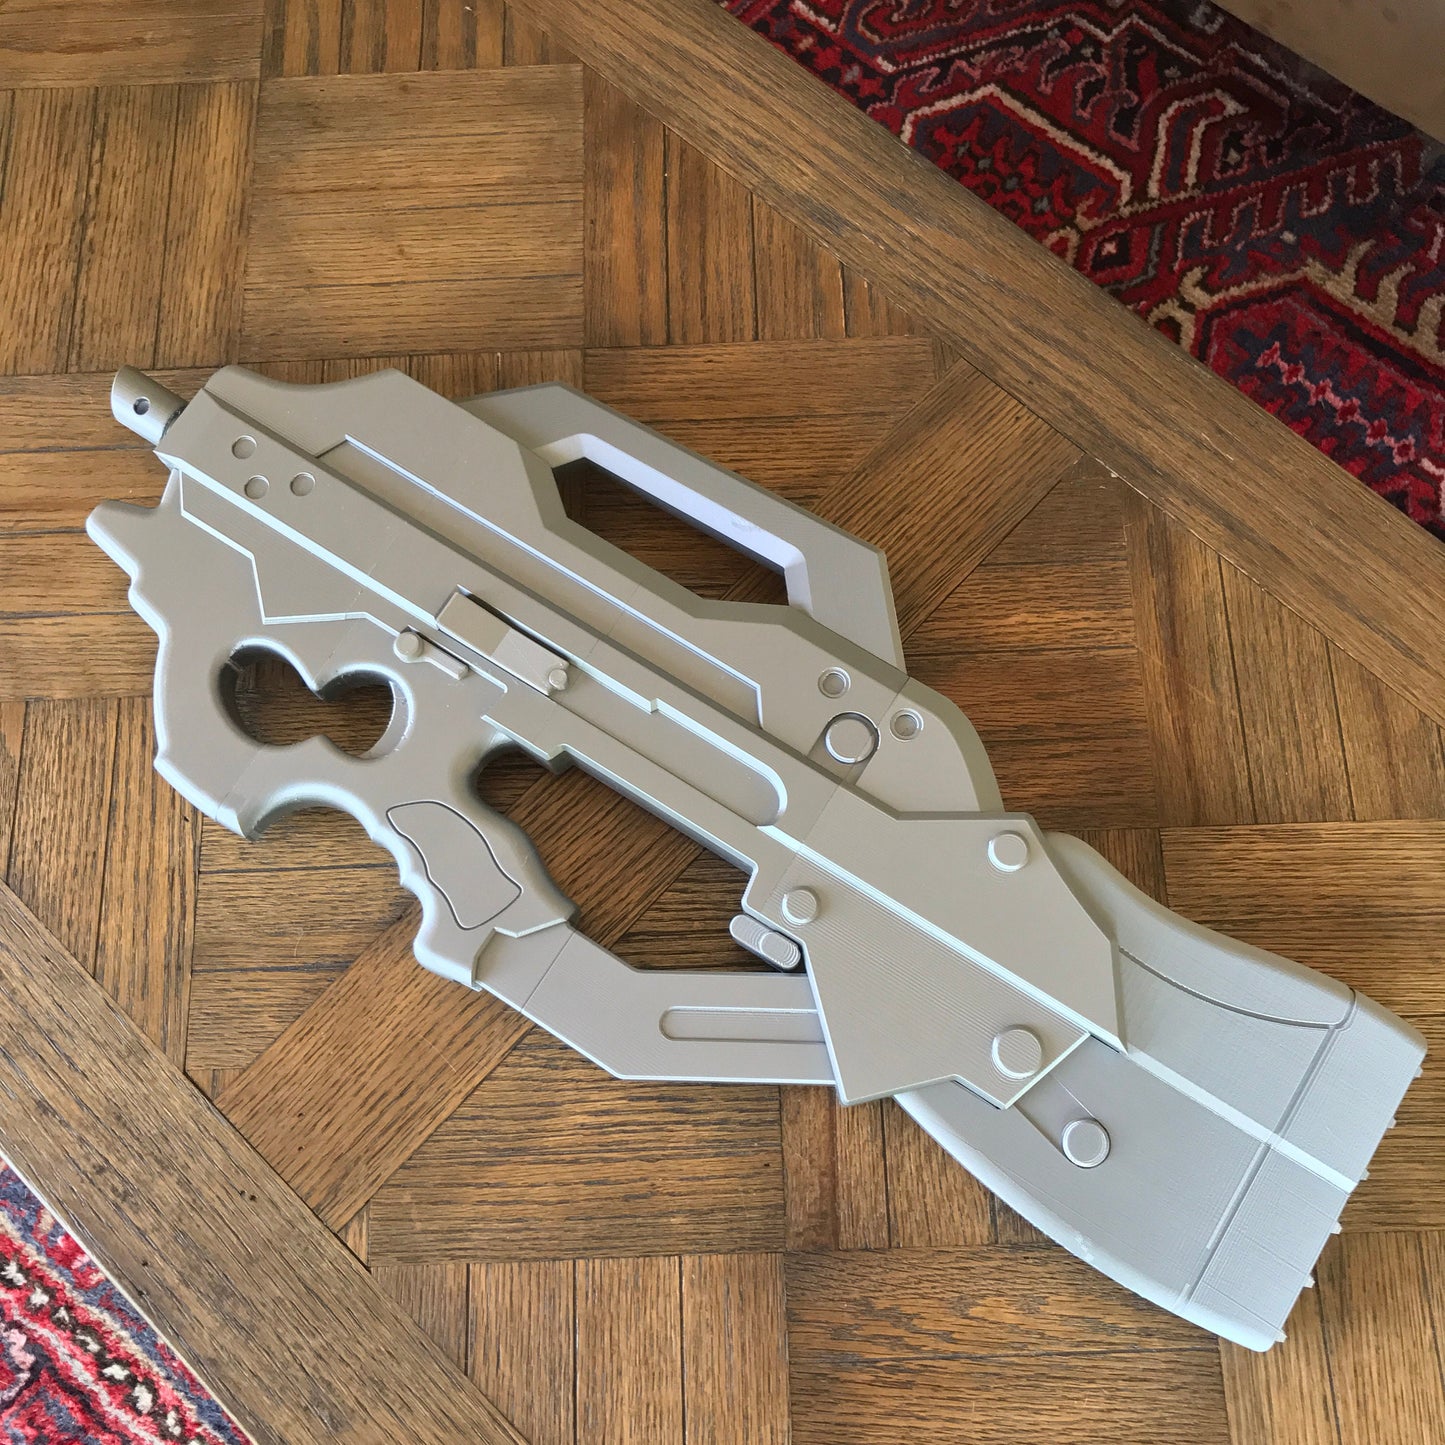 Seburo C26 - 3D printed kit. Ghost in the Shell